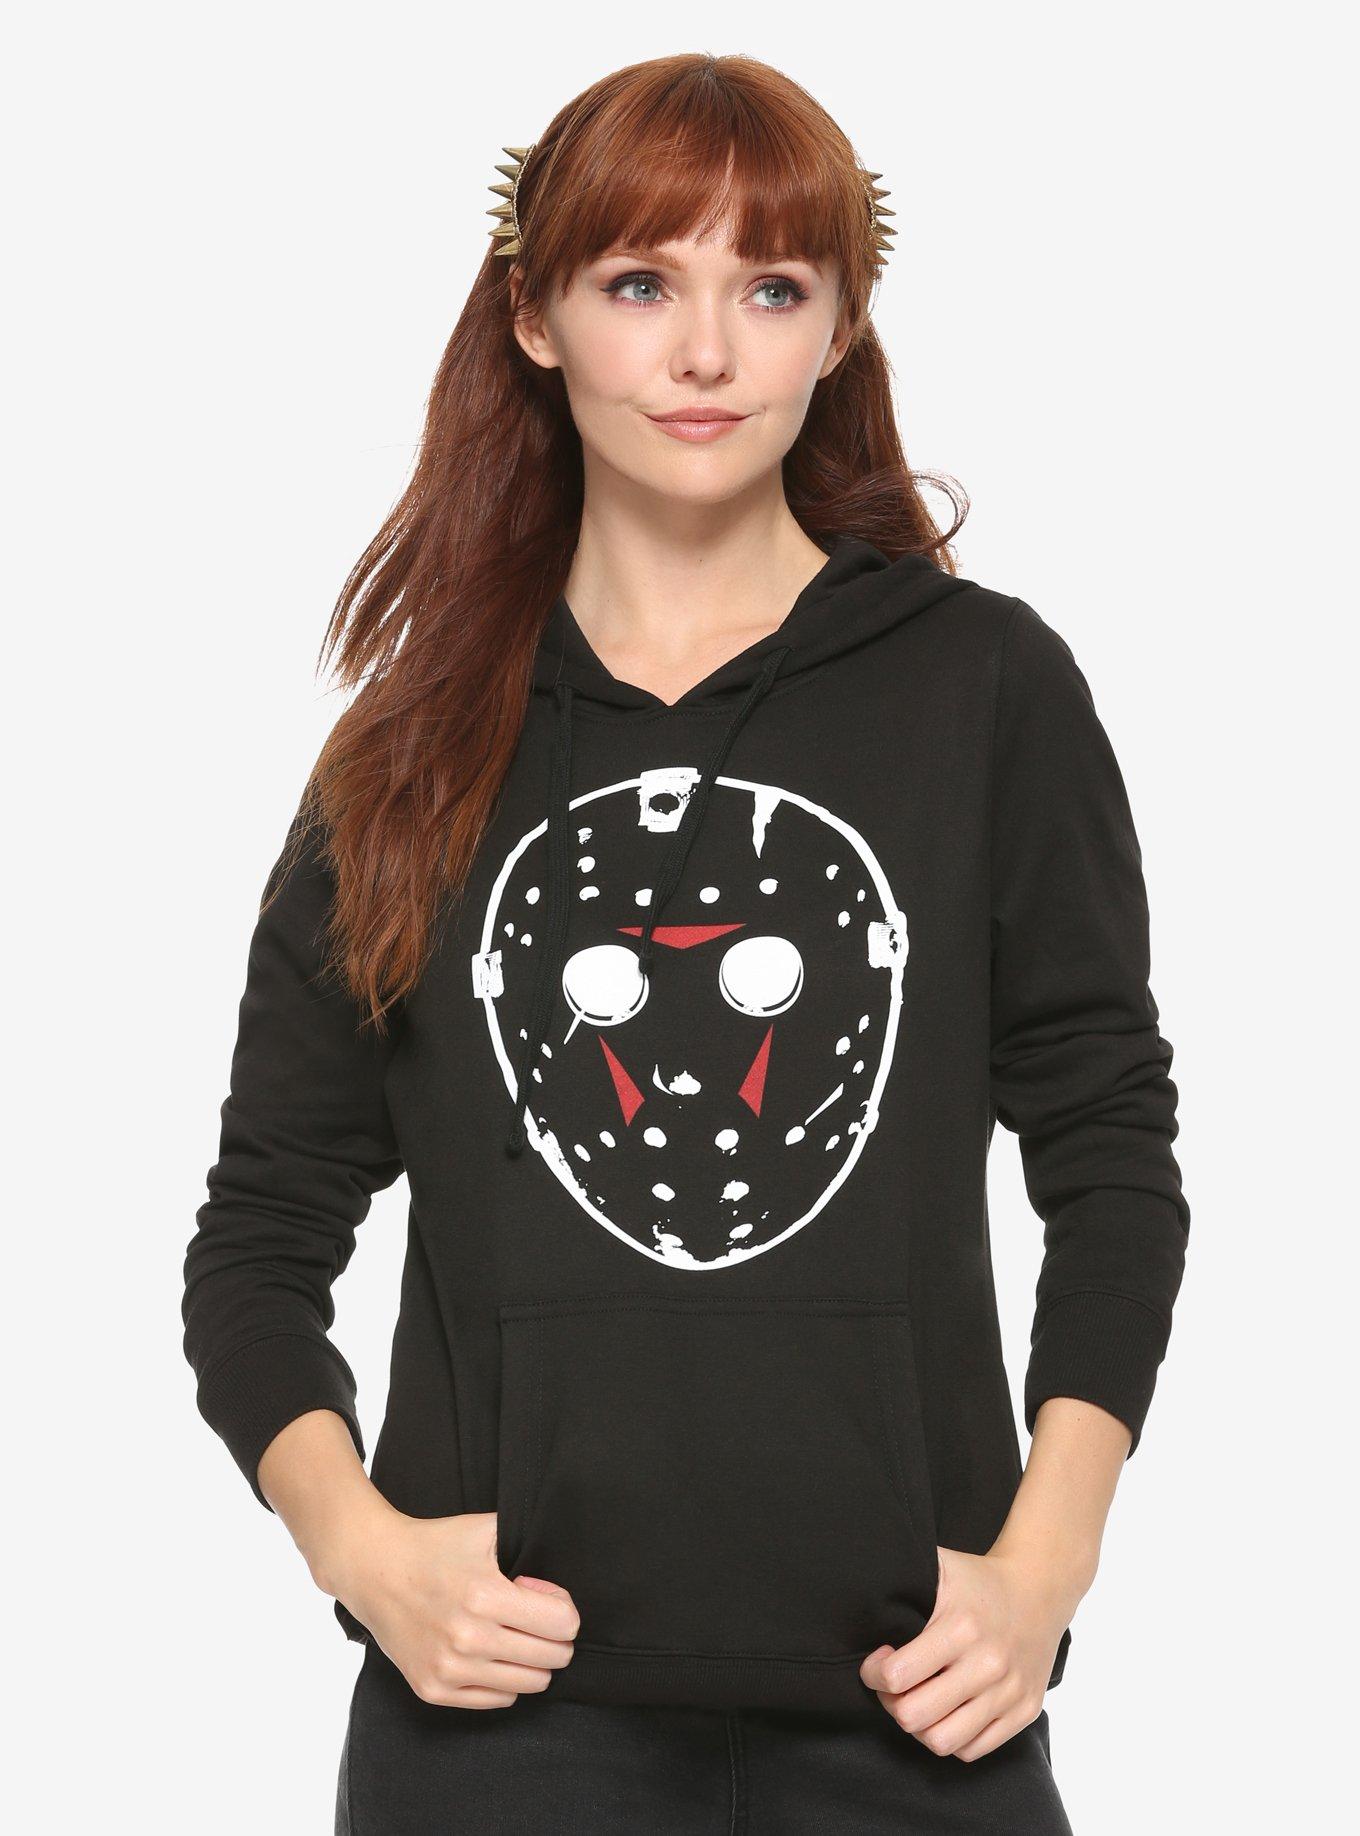 Friday The 13th Mask Girls Hoodie, BLACK, hi-res